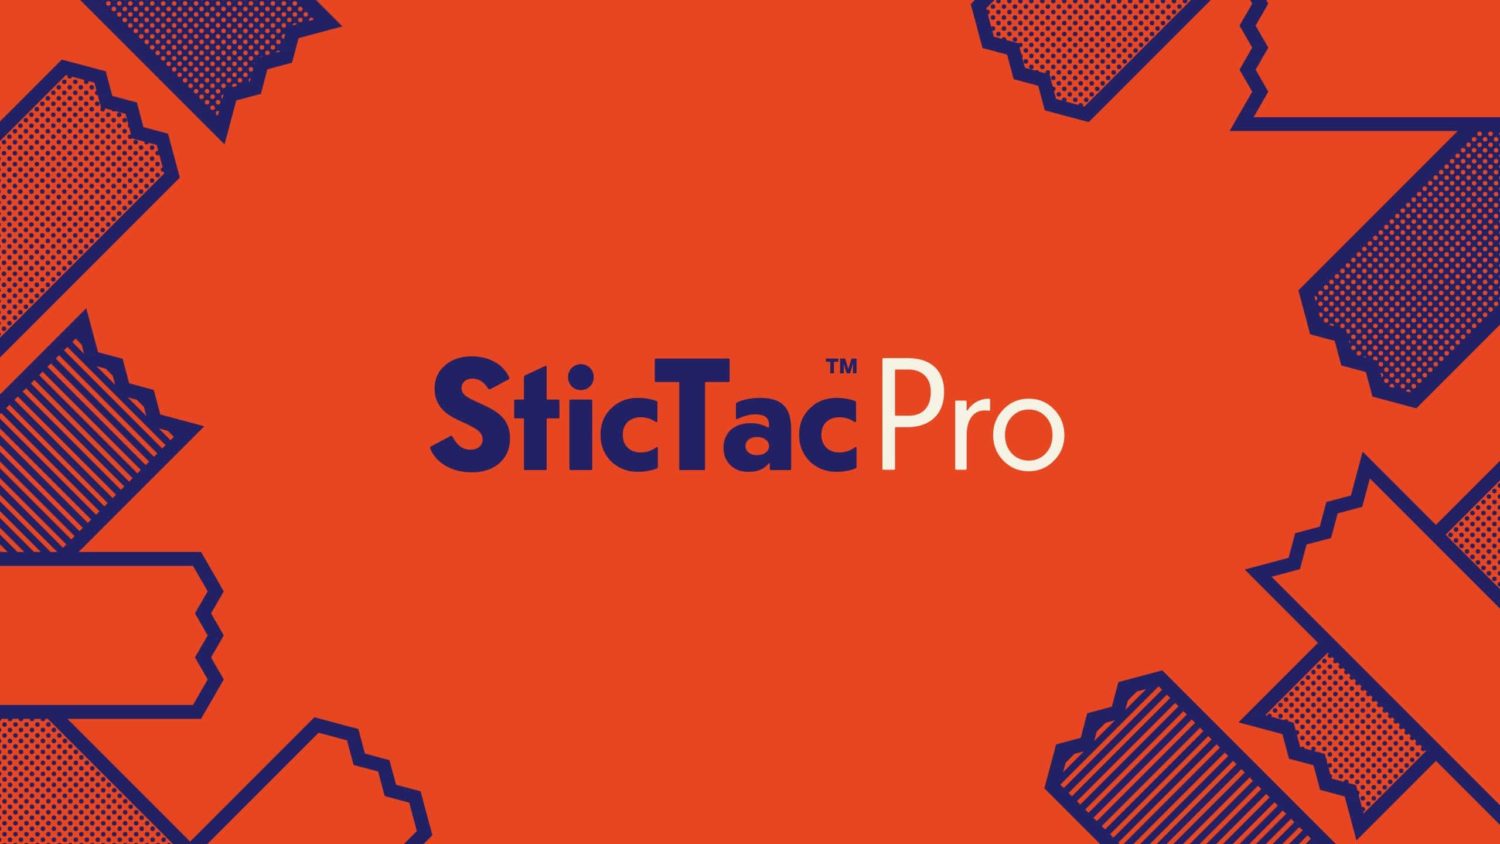 Logo for SticTac Pro against a red background